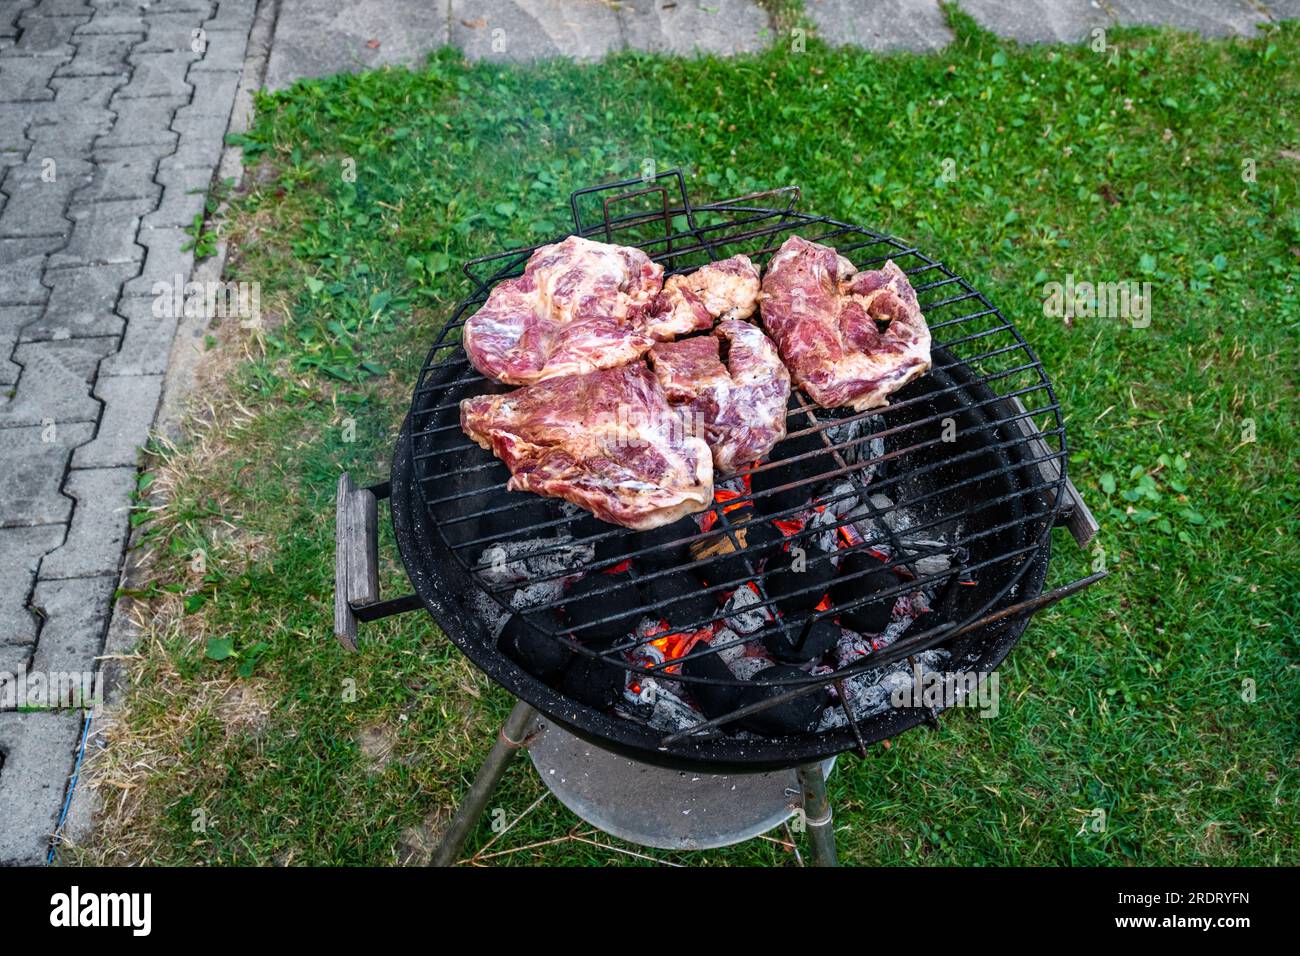 Old black outdoor grill with sliced marinated pork steak in garden. Stock Photo